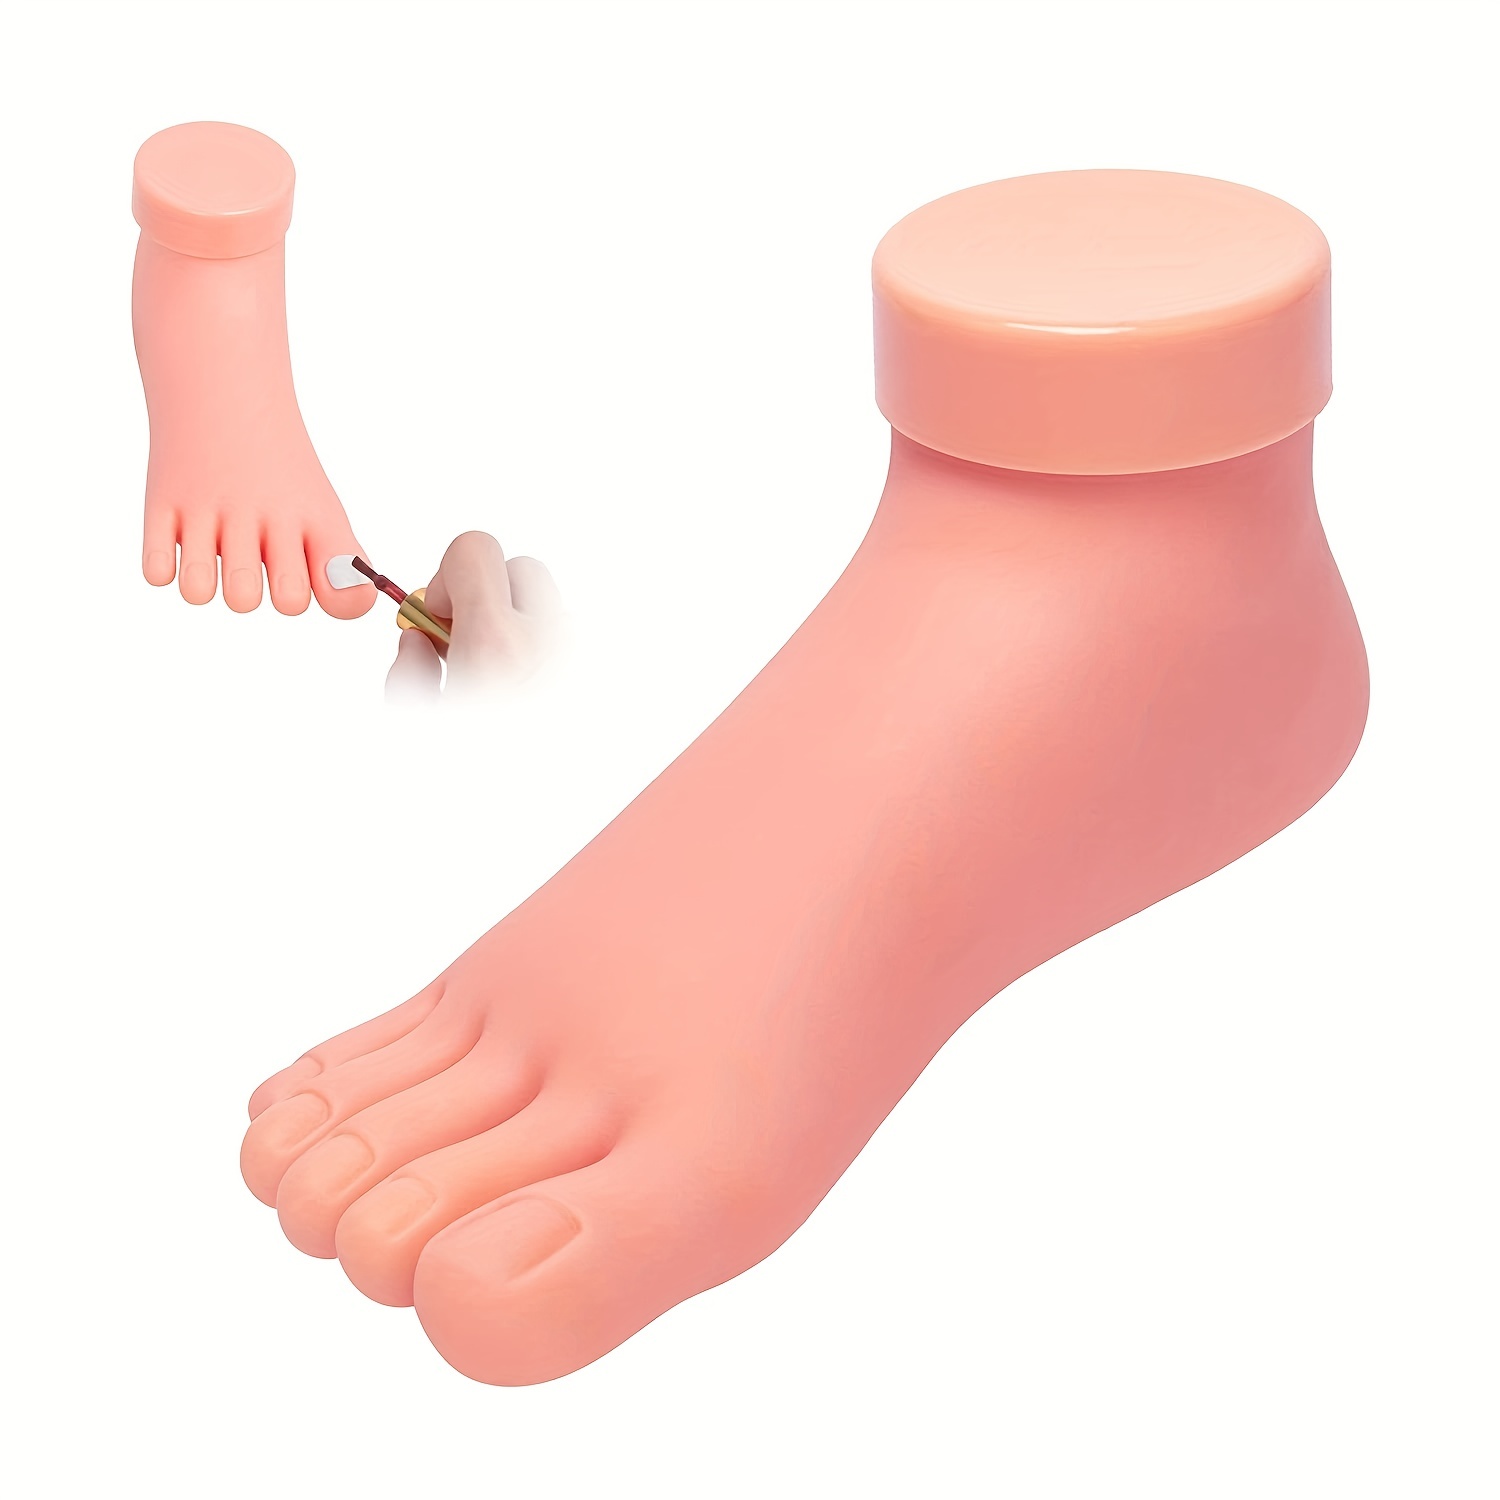 

Flexible And Soft Silicone Prosthetic Manicure Tool For Nail Practice - Perfect For Improving Your Nail Art Skills